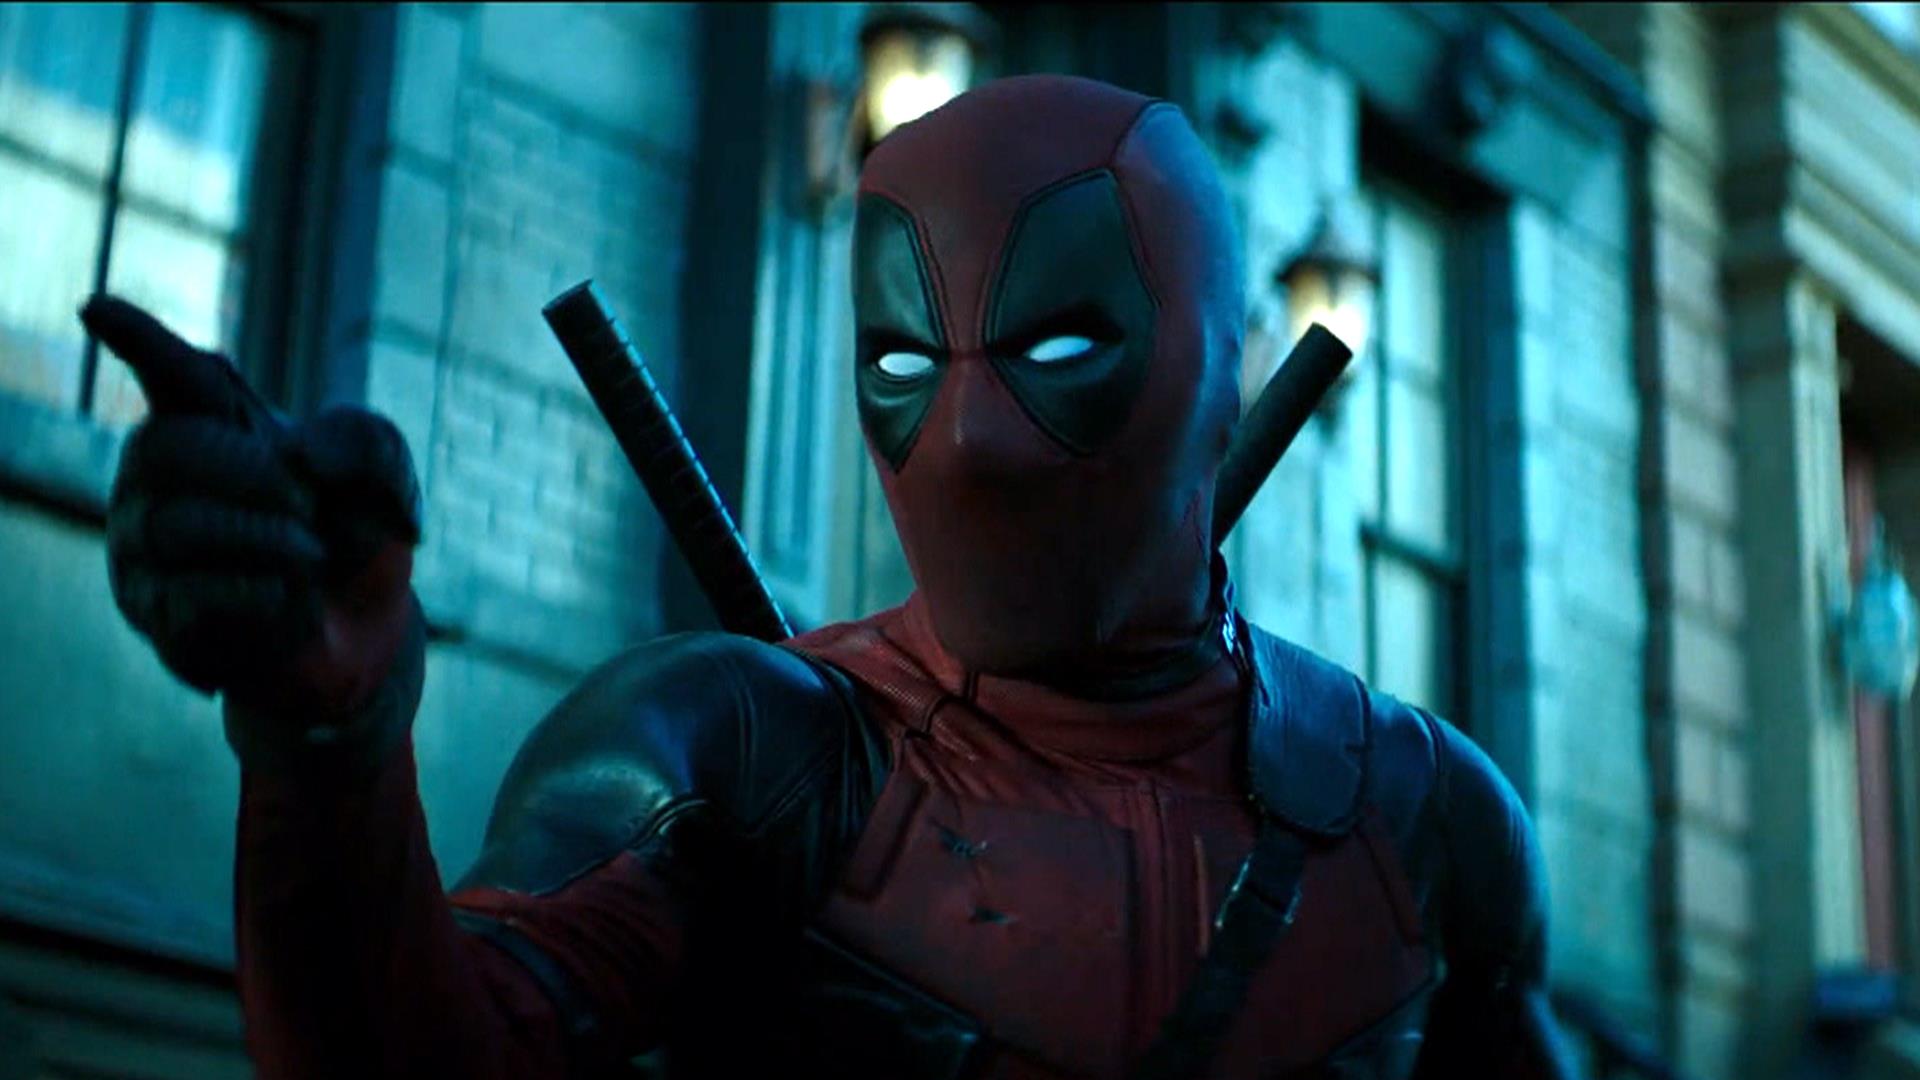 'Deadpool 2' trailer: TODAY shares a sneak peek at Ryan Reynolds action comedy